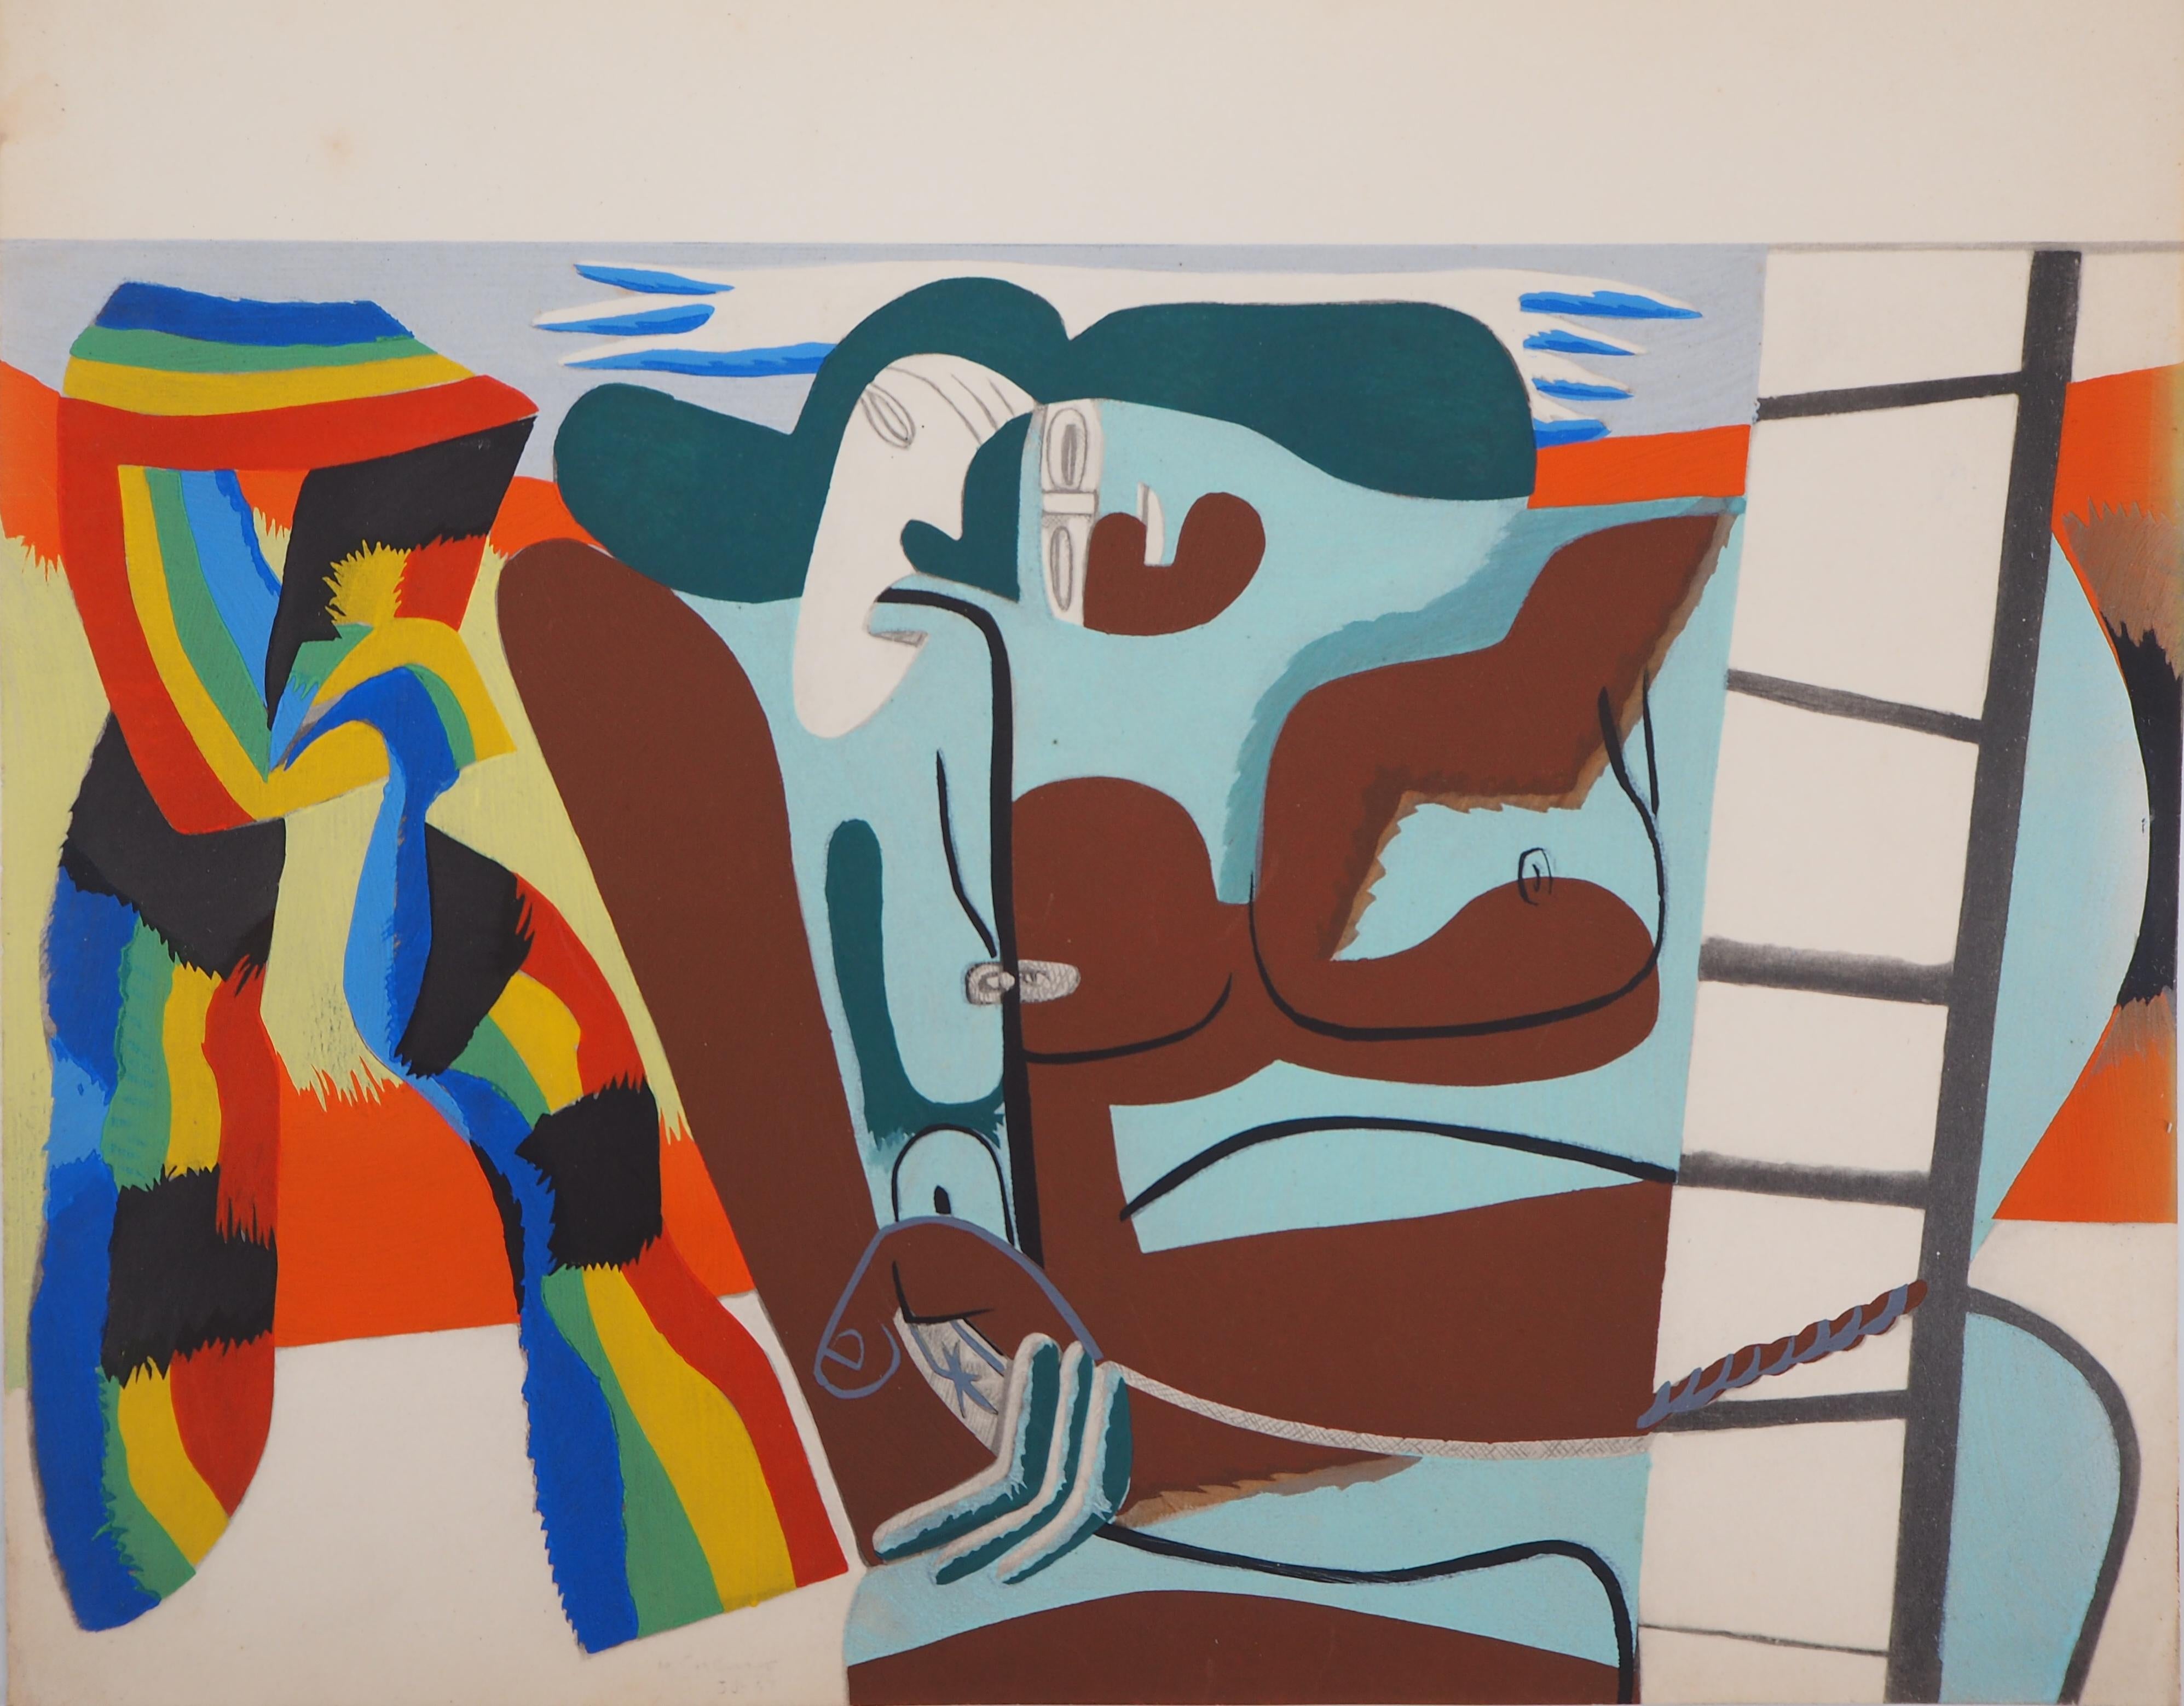 Pride : Two Women with Rainbow Scarf - Lithograph and watercolor stencil - Print by Le Corbusier